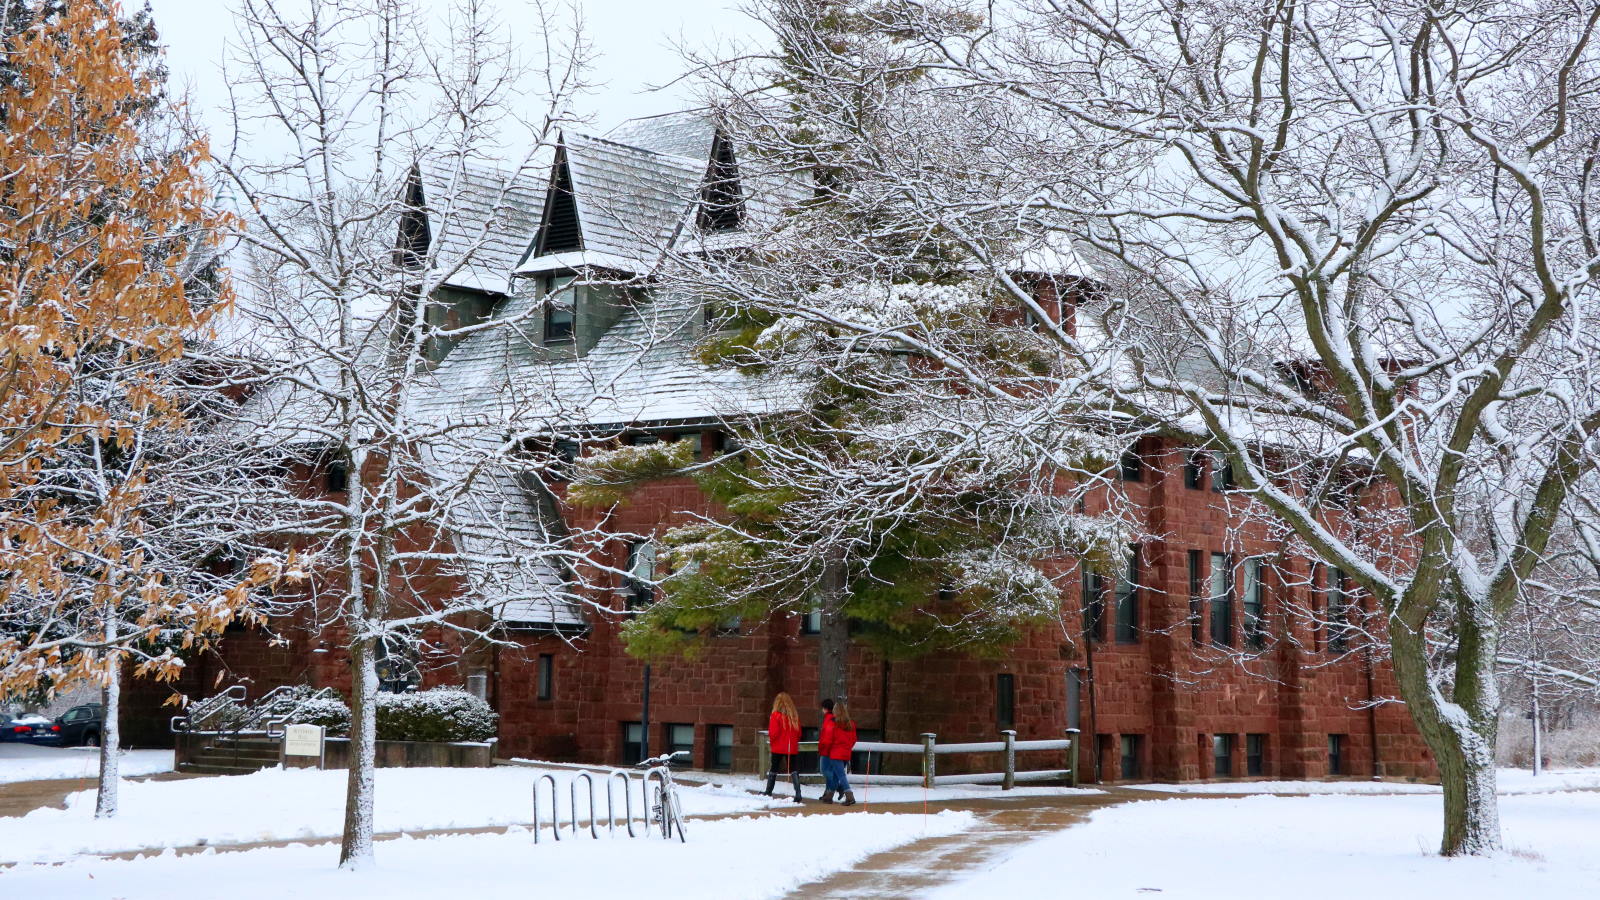 view of Hotchkiss hall covered in snow, two students walk in the foreground